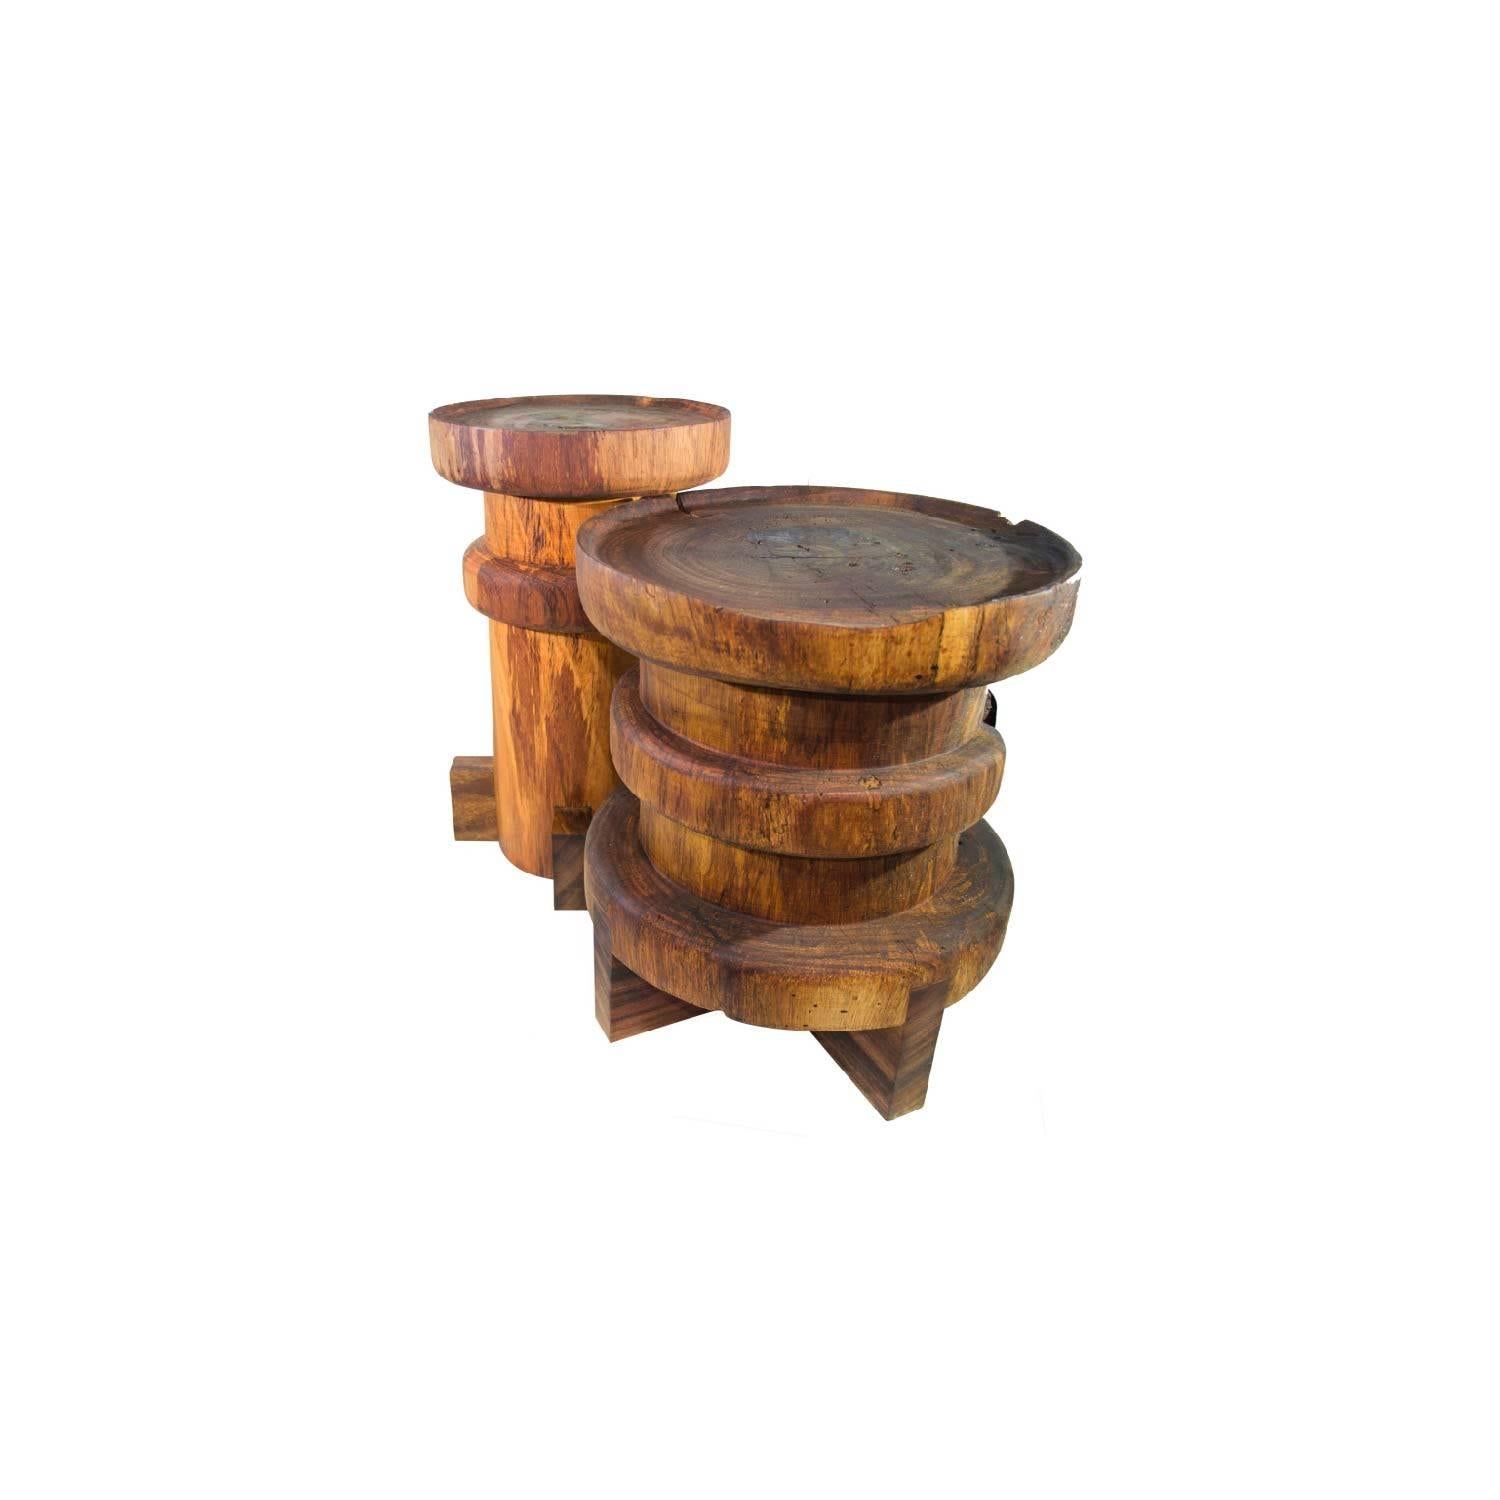 This contemporary table body is made out of a single turned tree trunk with a natural finish.
 